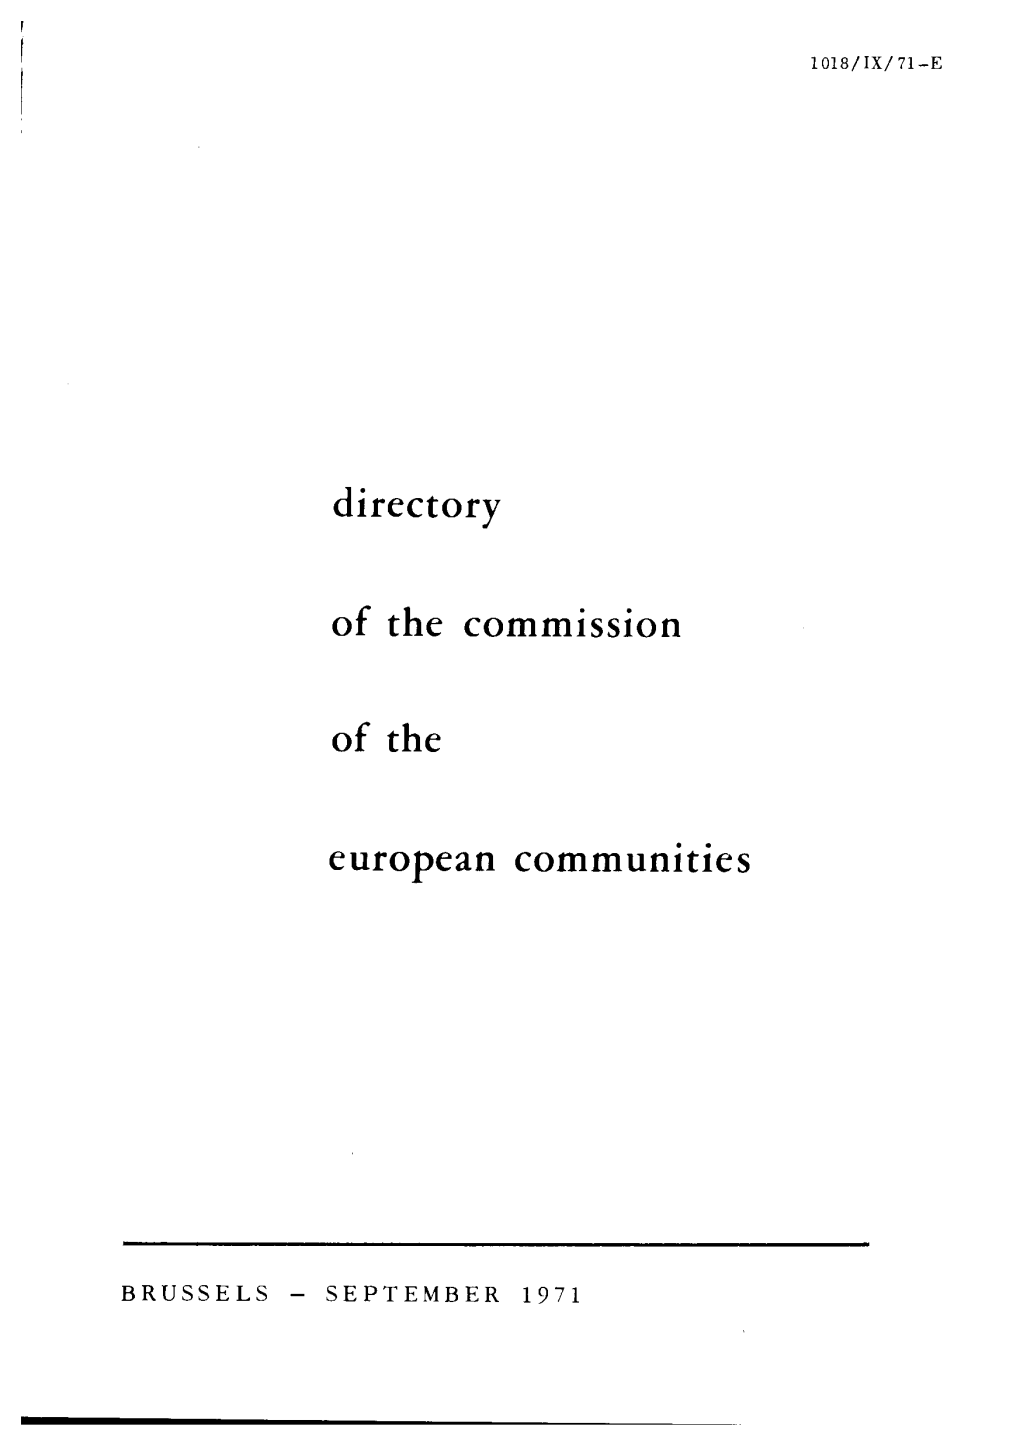 Directory of the Commission of the European Communtttes